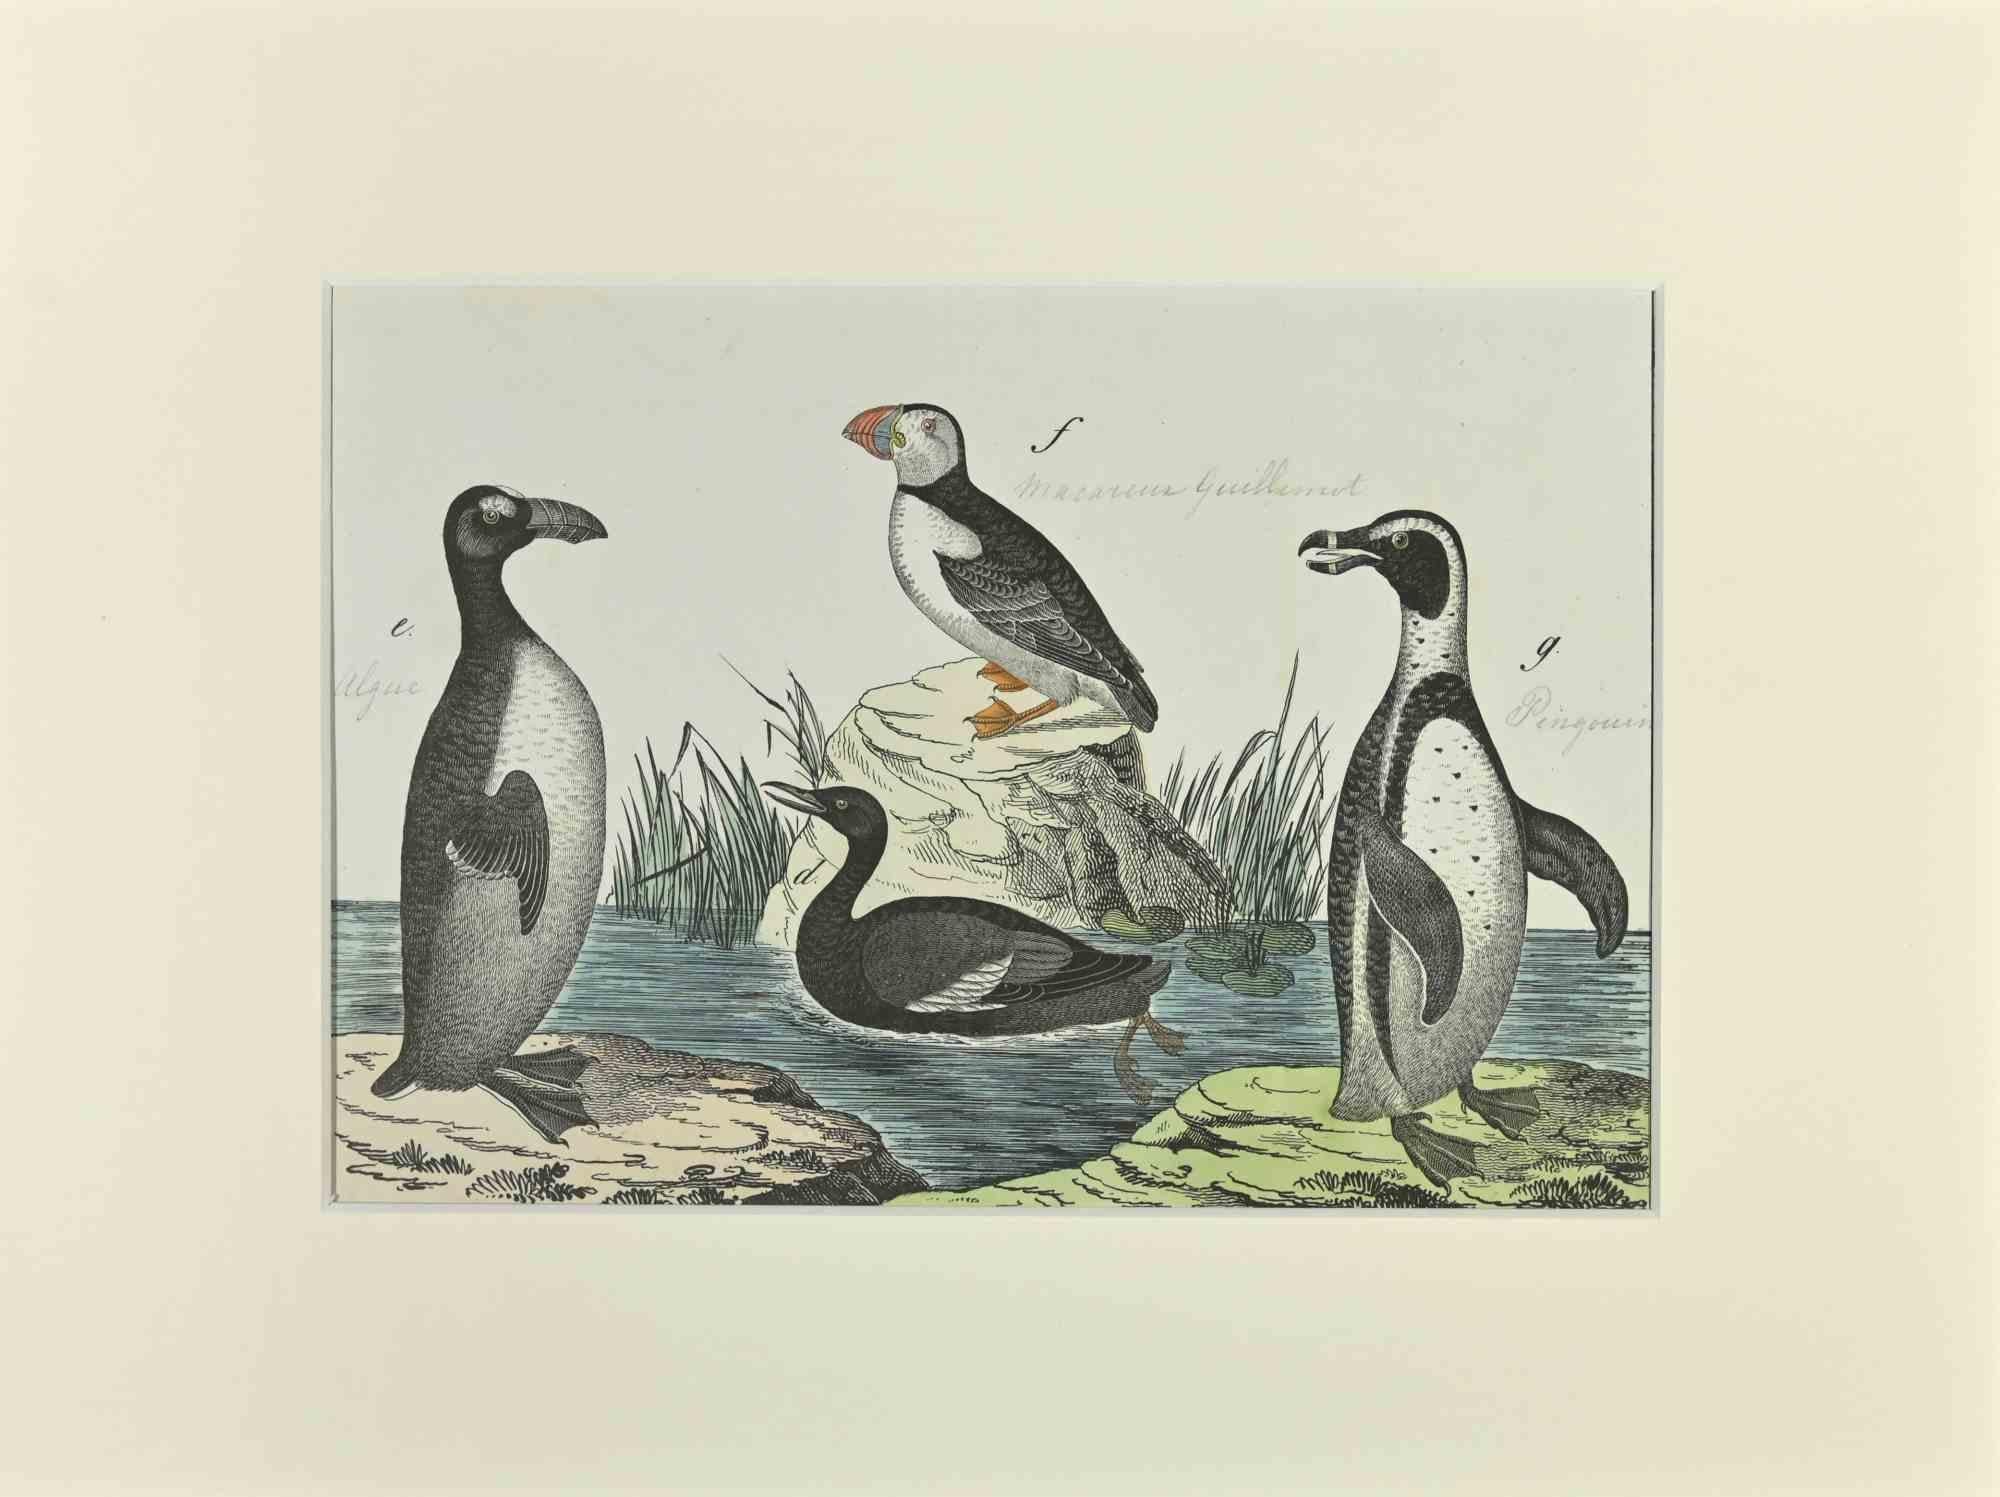 Macarena and Penguin is an Etching hand colored realized by Gotthilf Heinrich von Schubert - Johann Friedrich Naumann, Illustration from Natural history of birds in pictures, published by Stuttgart and Esslingen, Schreiber and Schill 1840 ca.